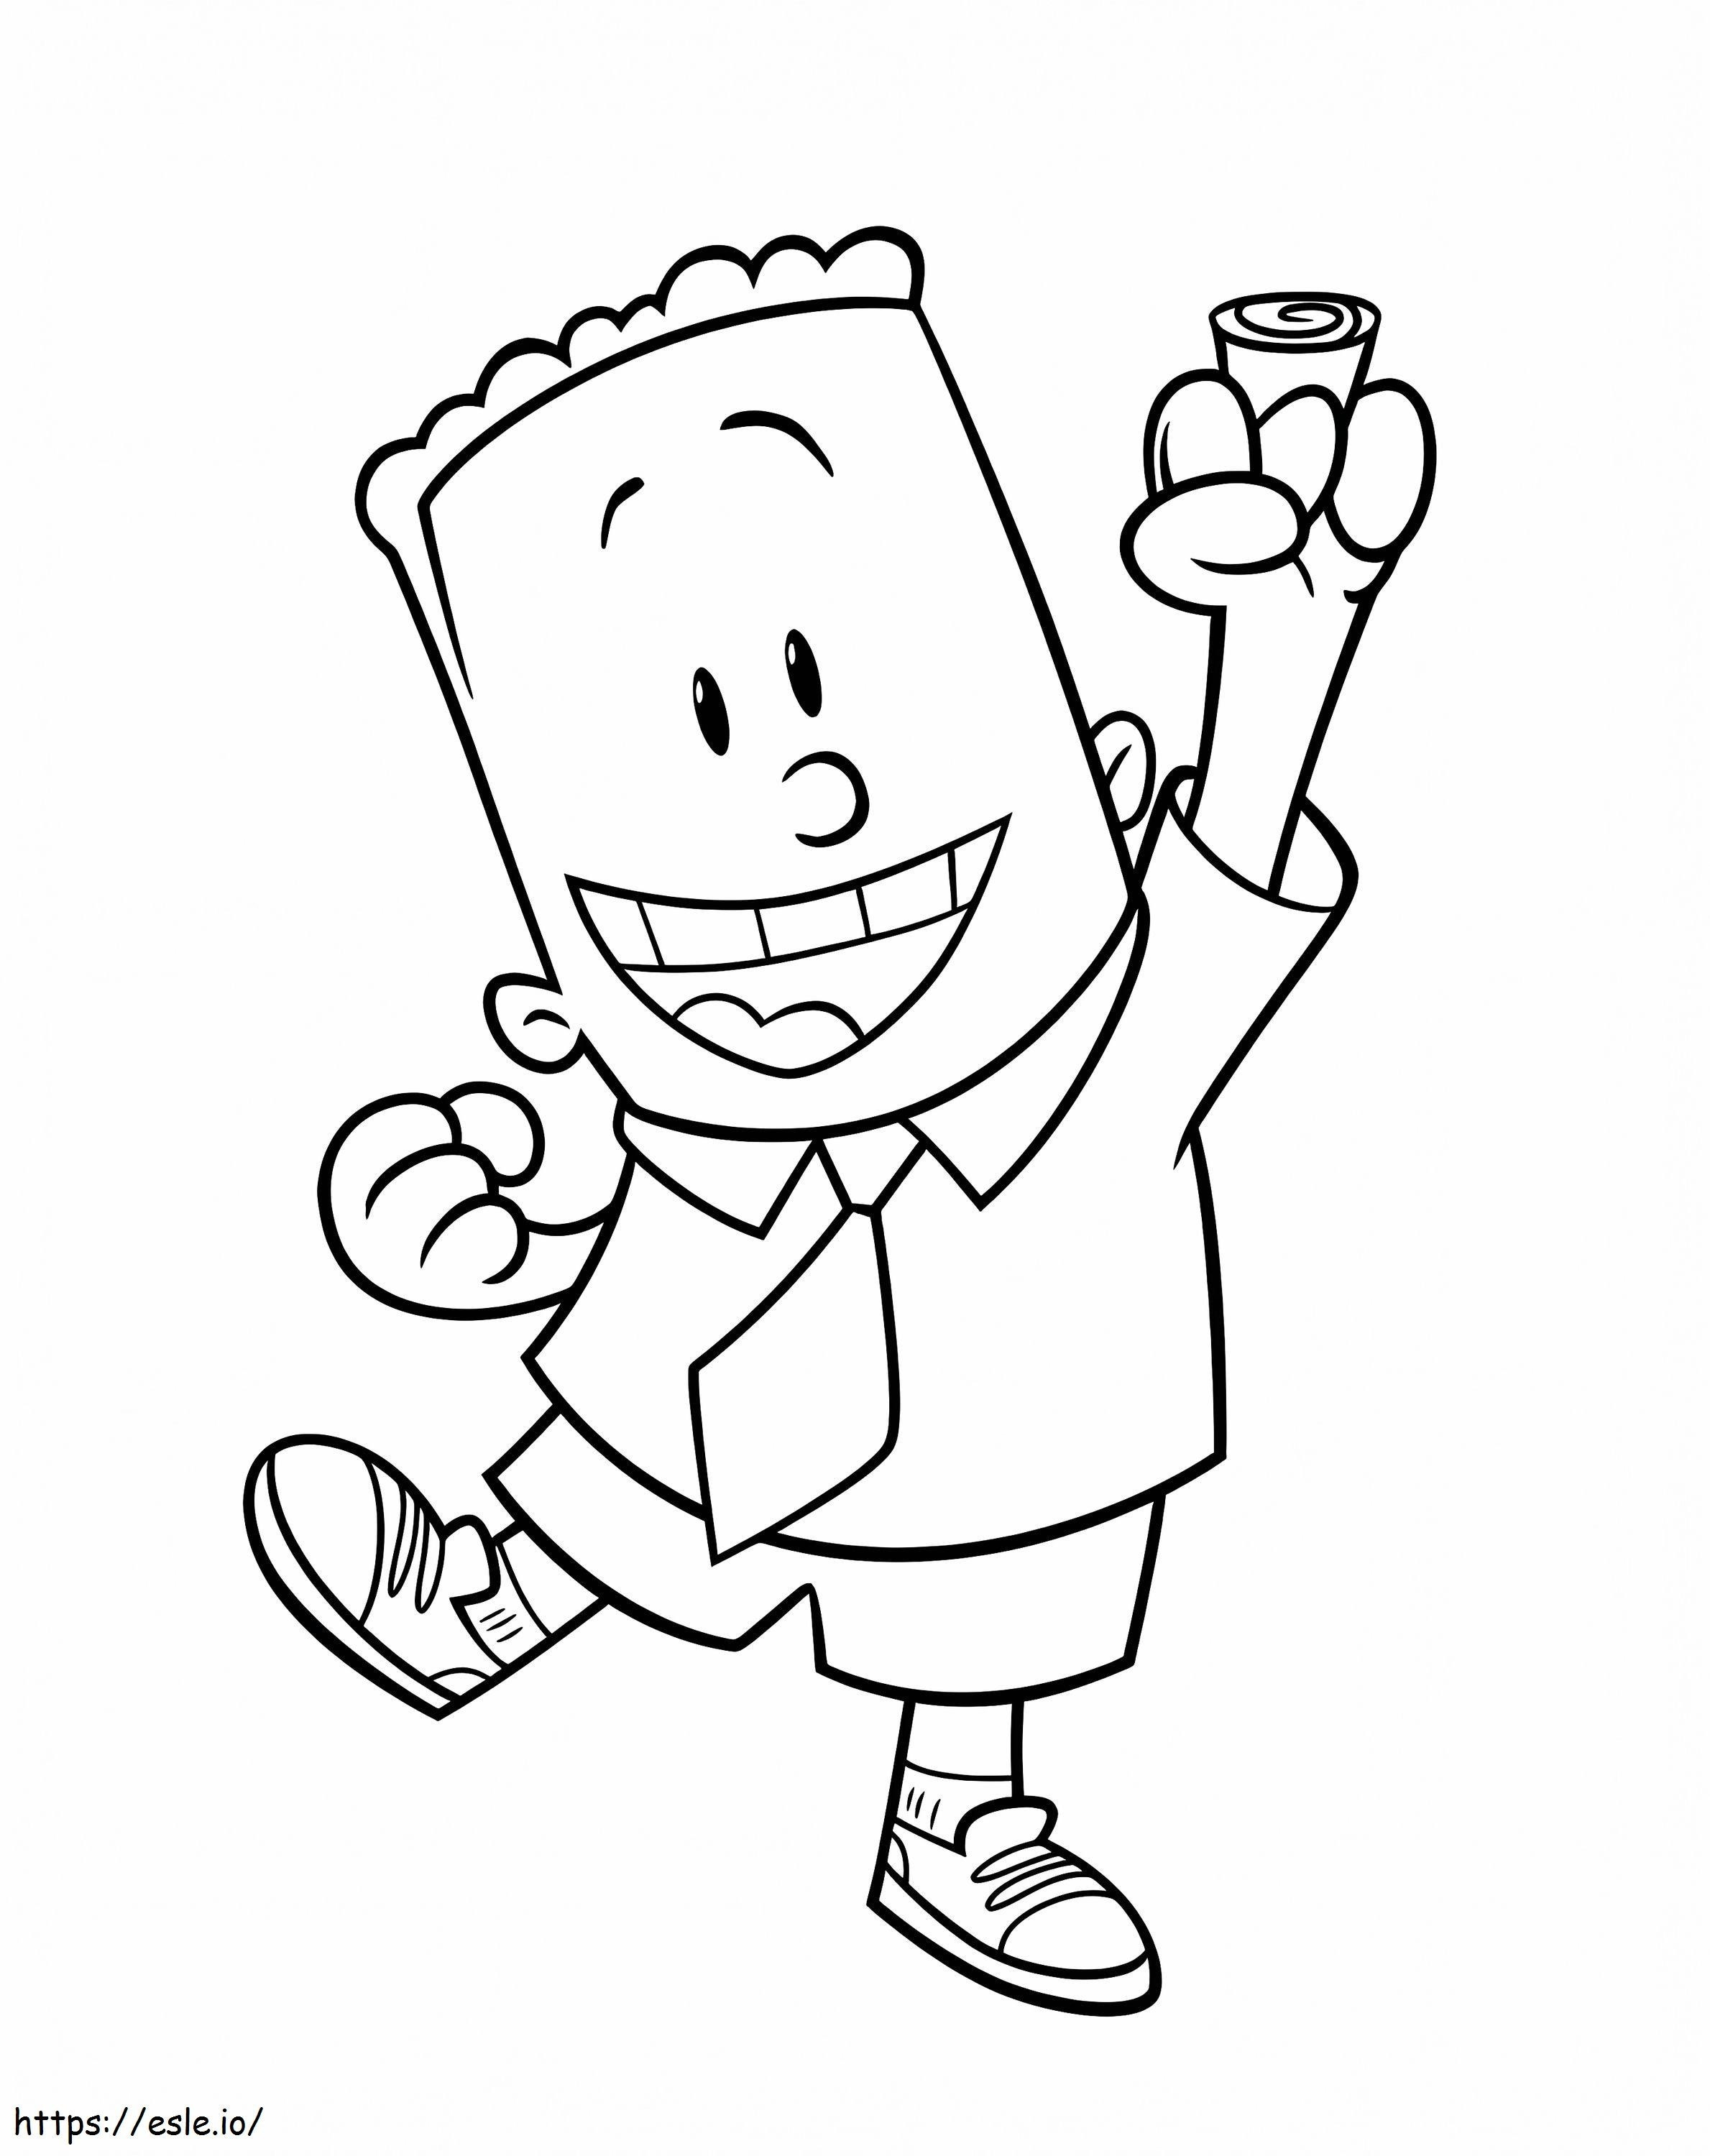 1575622959 George Captain Underpants coloring page